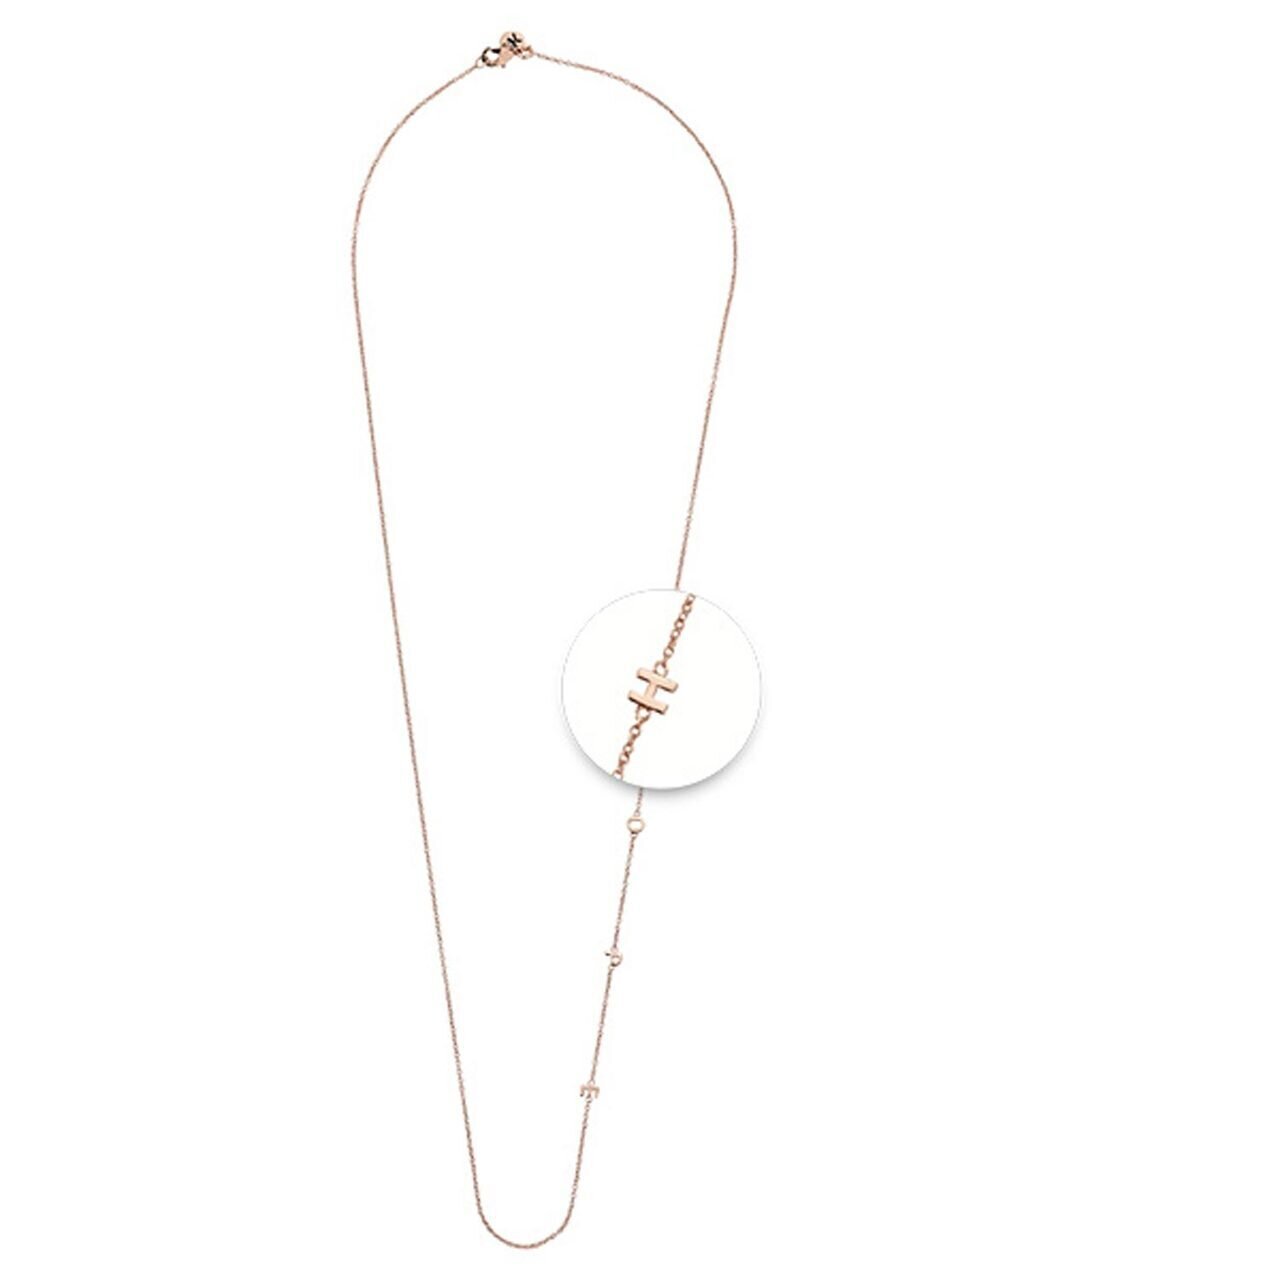 Nikki Lissoni Hope Rose Gold-plated Necklace 60cm Compatible with Pendant N1033RG60